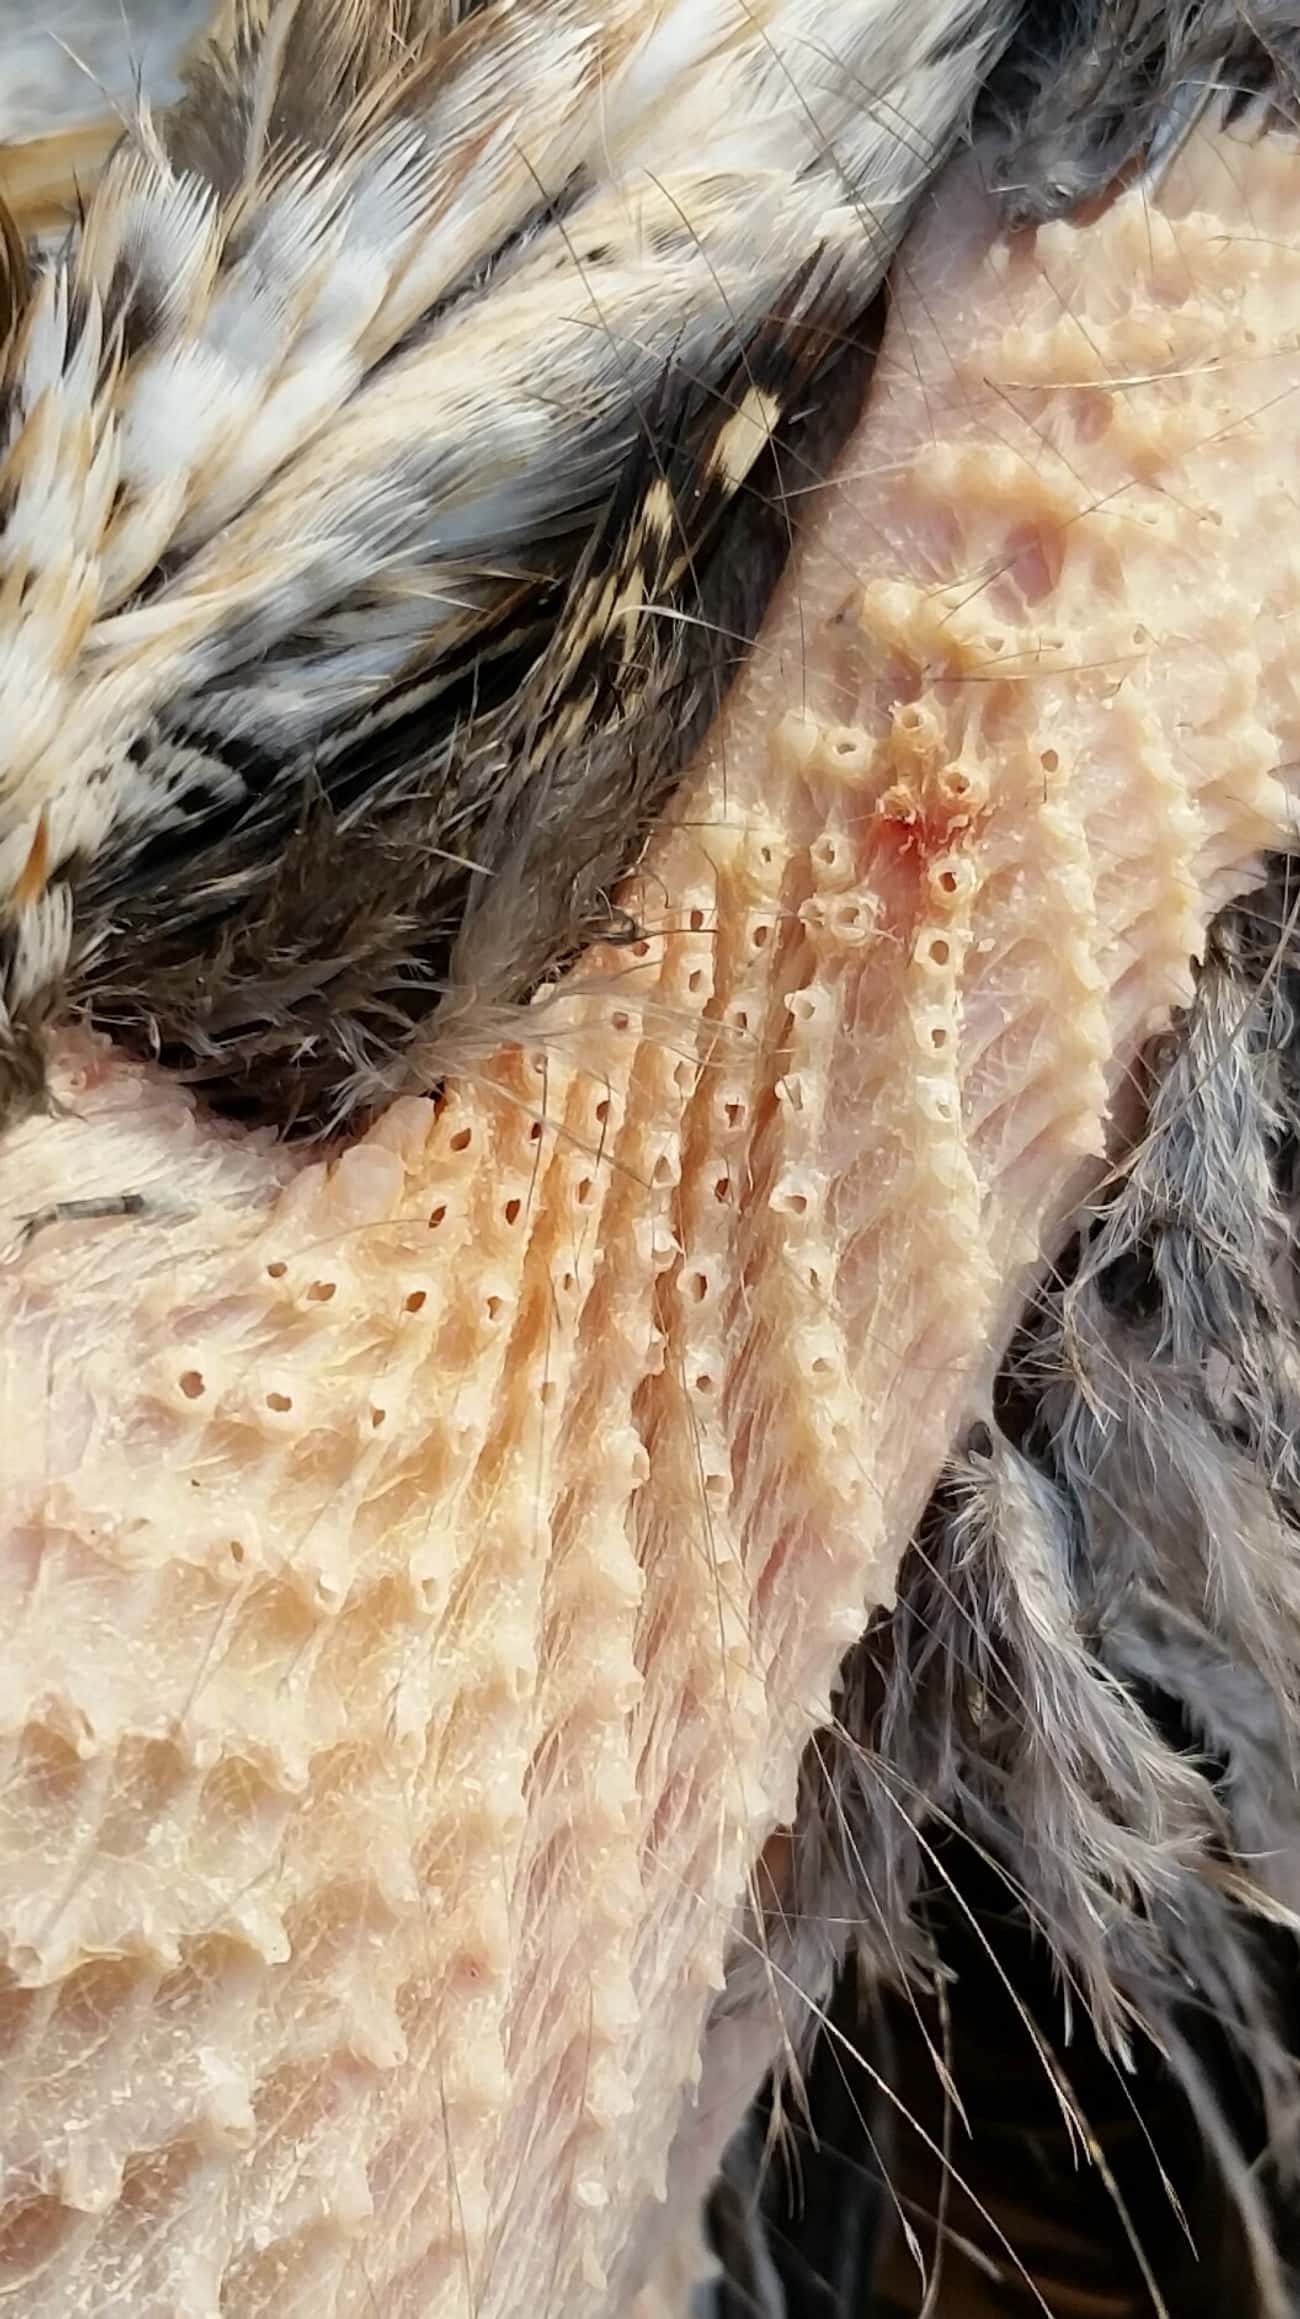 The Neck of this Plucked Pheasant